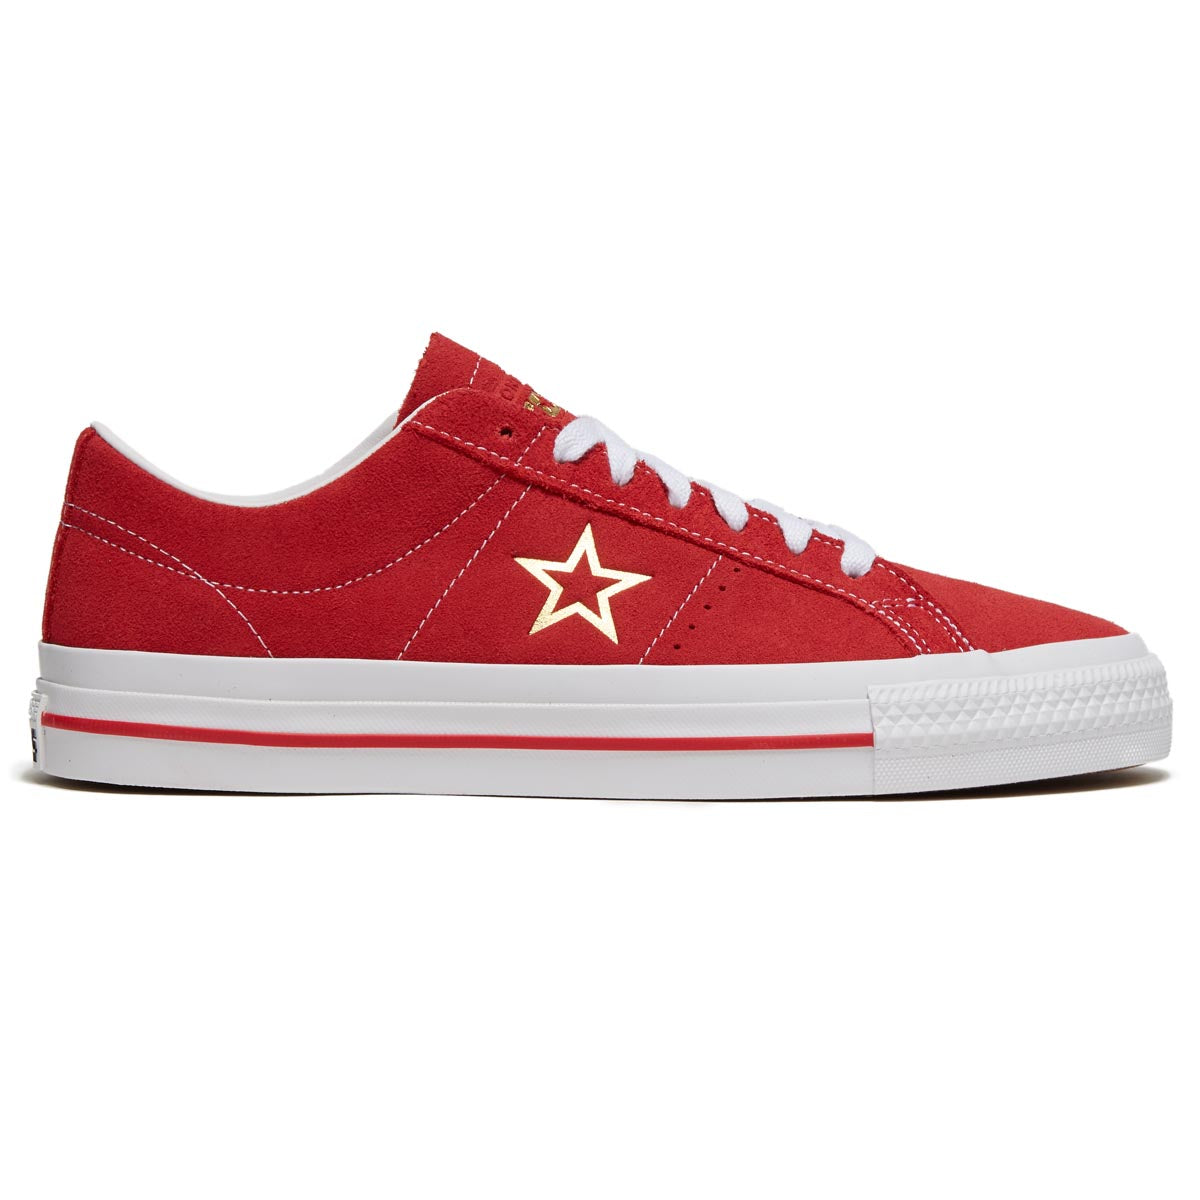 Converse One Star Pro Suede Ox Shoes - Varsity Red/White/Gold image 1